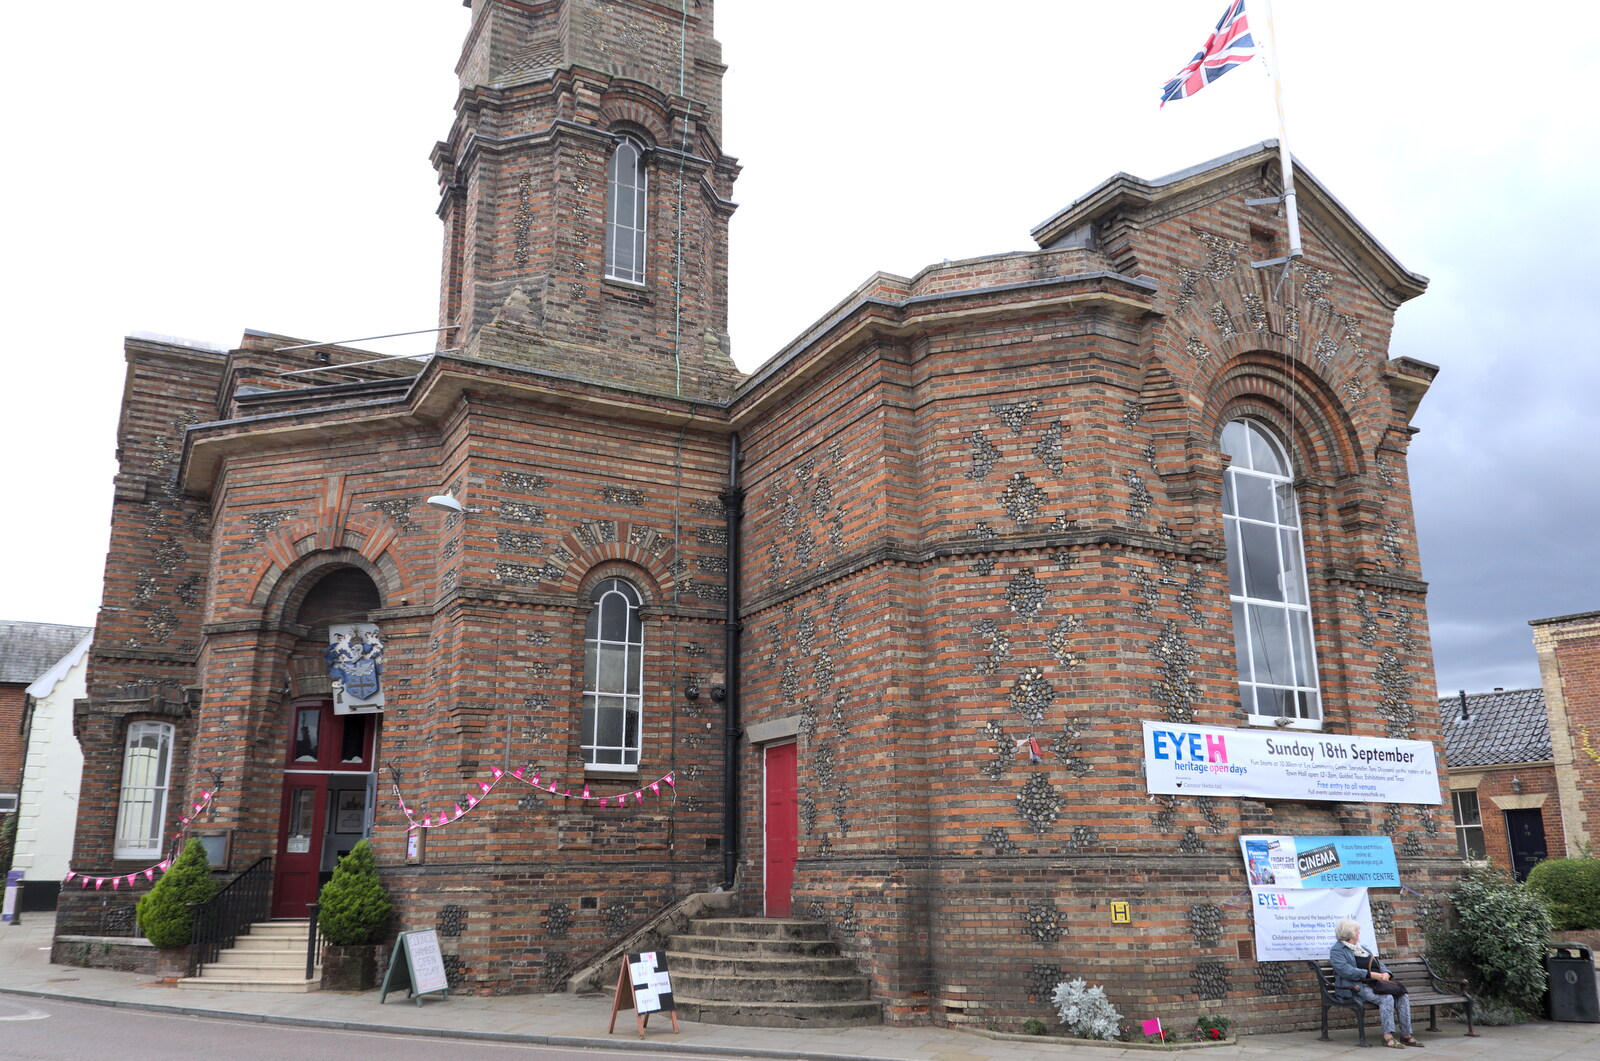 A Heritage Open Day, Eye, Suffolk - 18th September 2022: The Victorian town hall in Eye